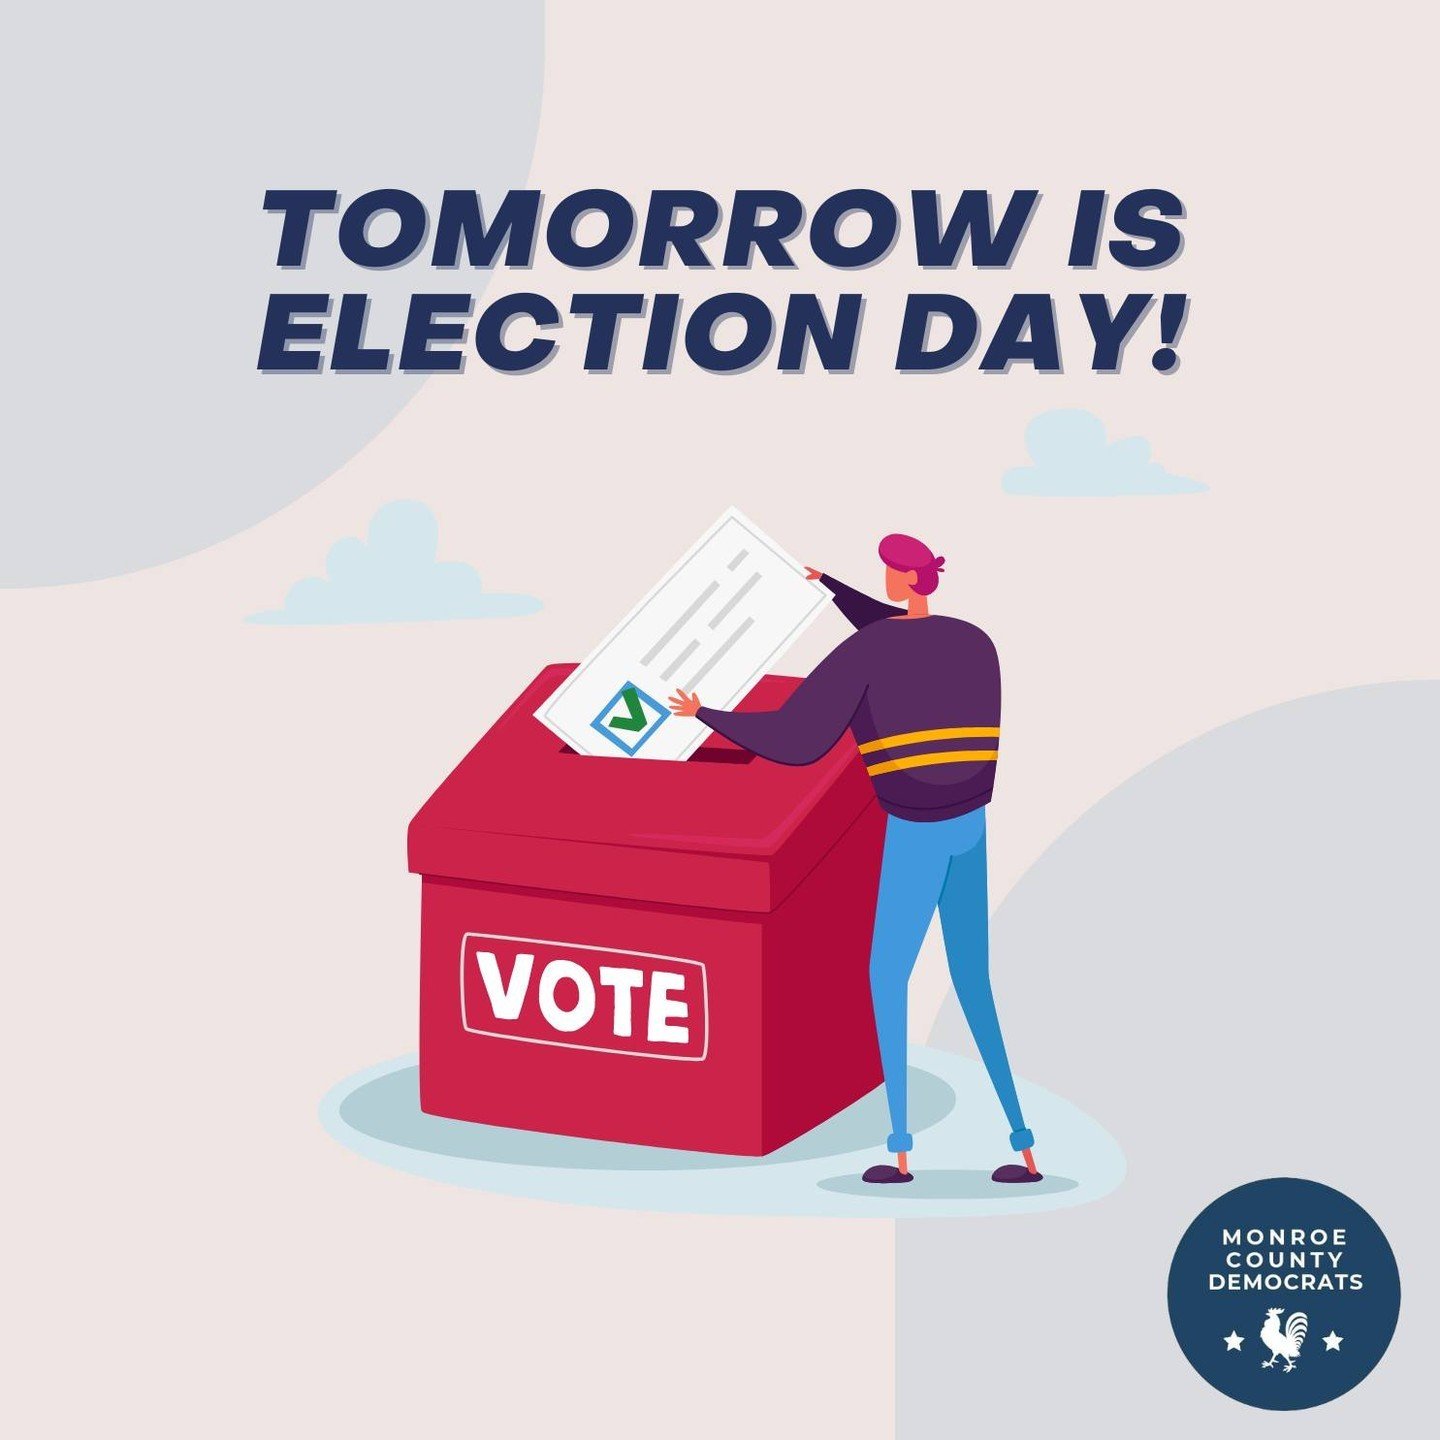 Blue Revue (Special Release): Election Day is Tomorrow, May 7!